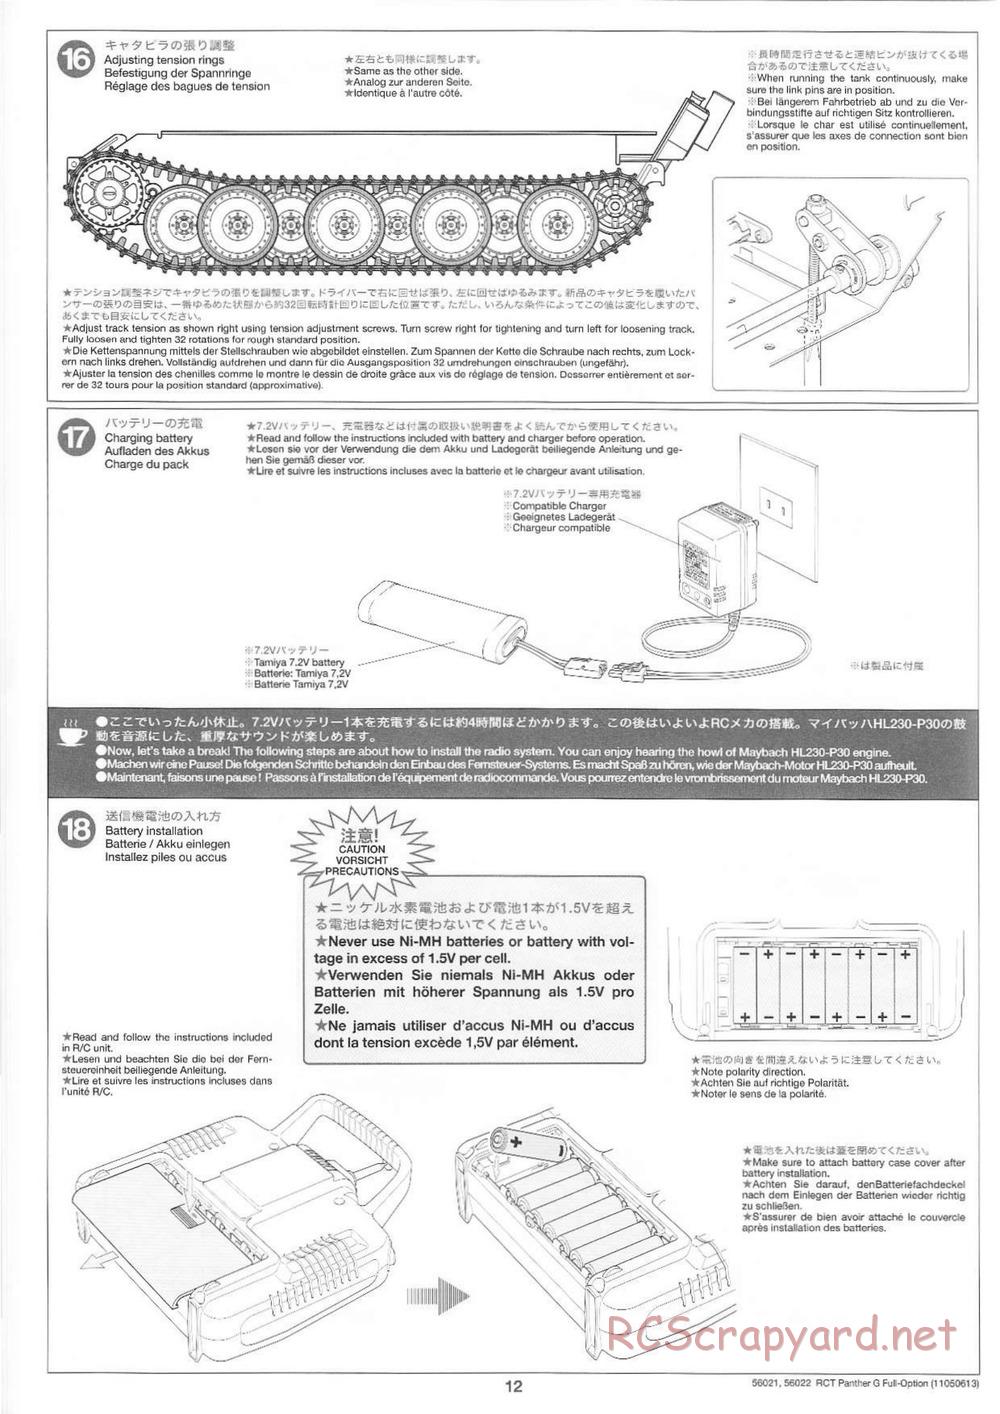 Tamiya - Panther Type G - 1/16 Scale Chassis - Manual - Page 12